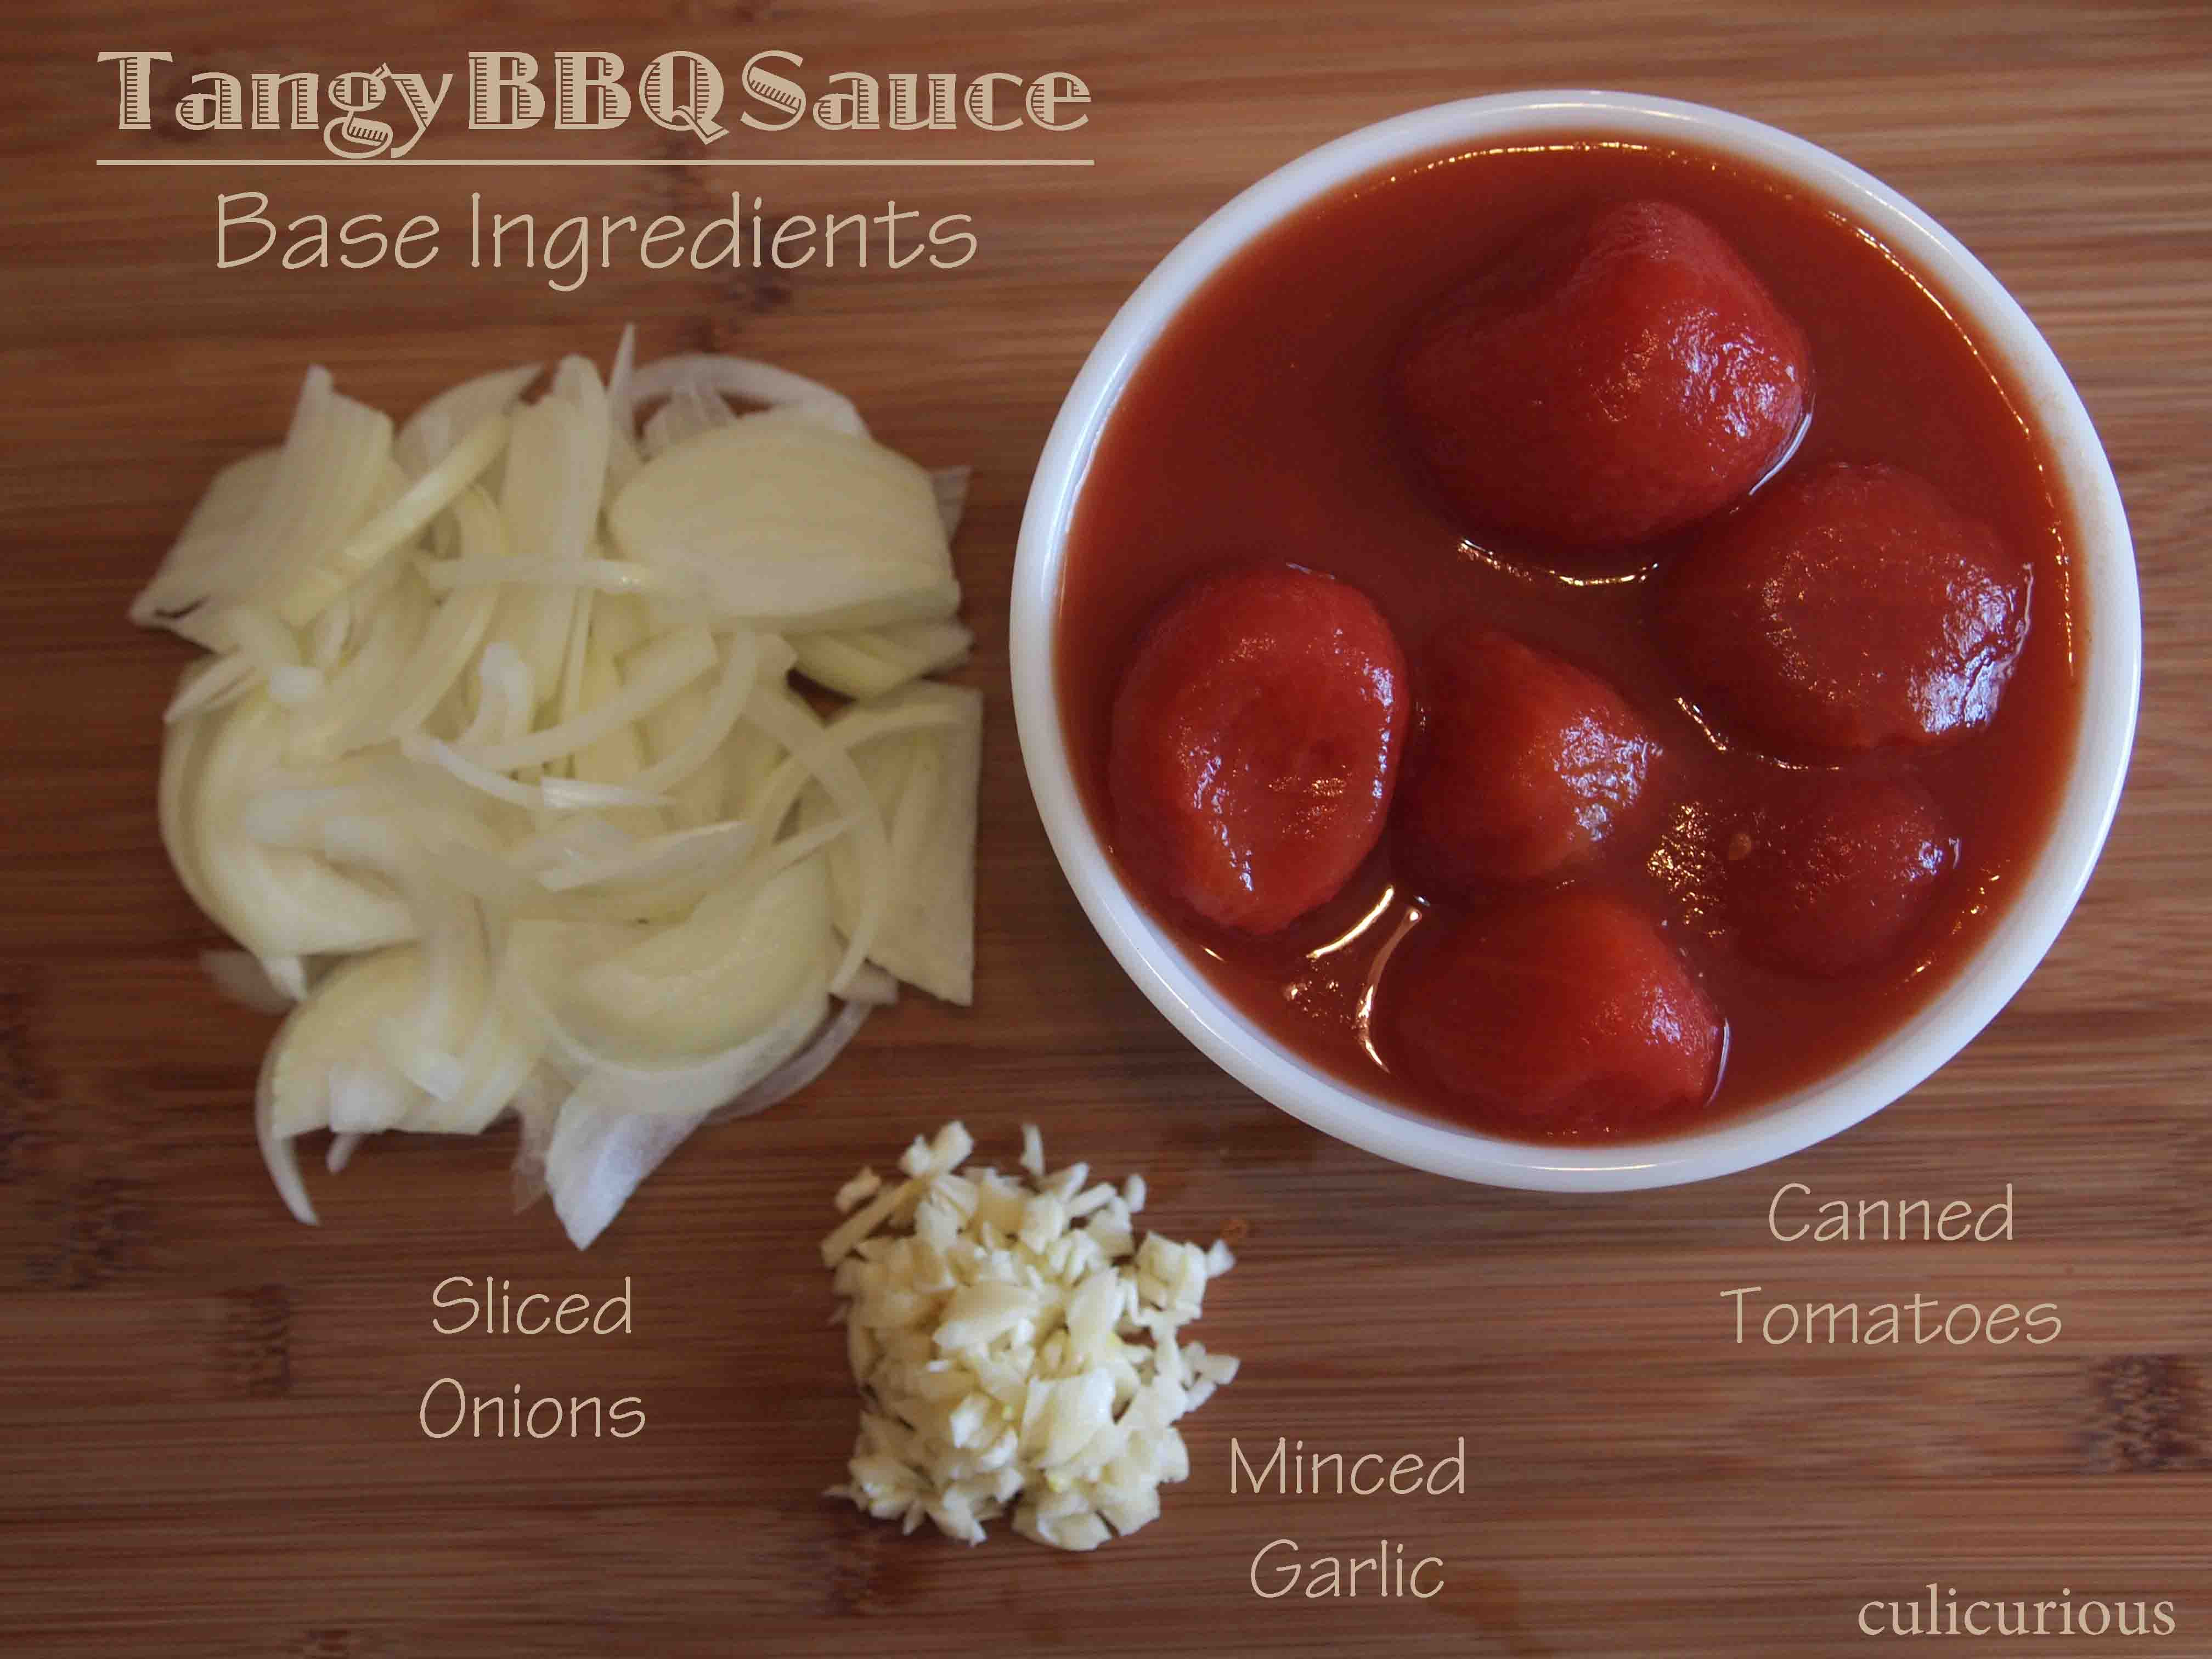 Bbq Sauce Ingredients
 Tangy Barbecue Sauce Recipe culicurious